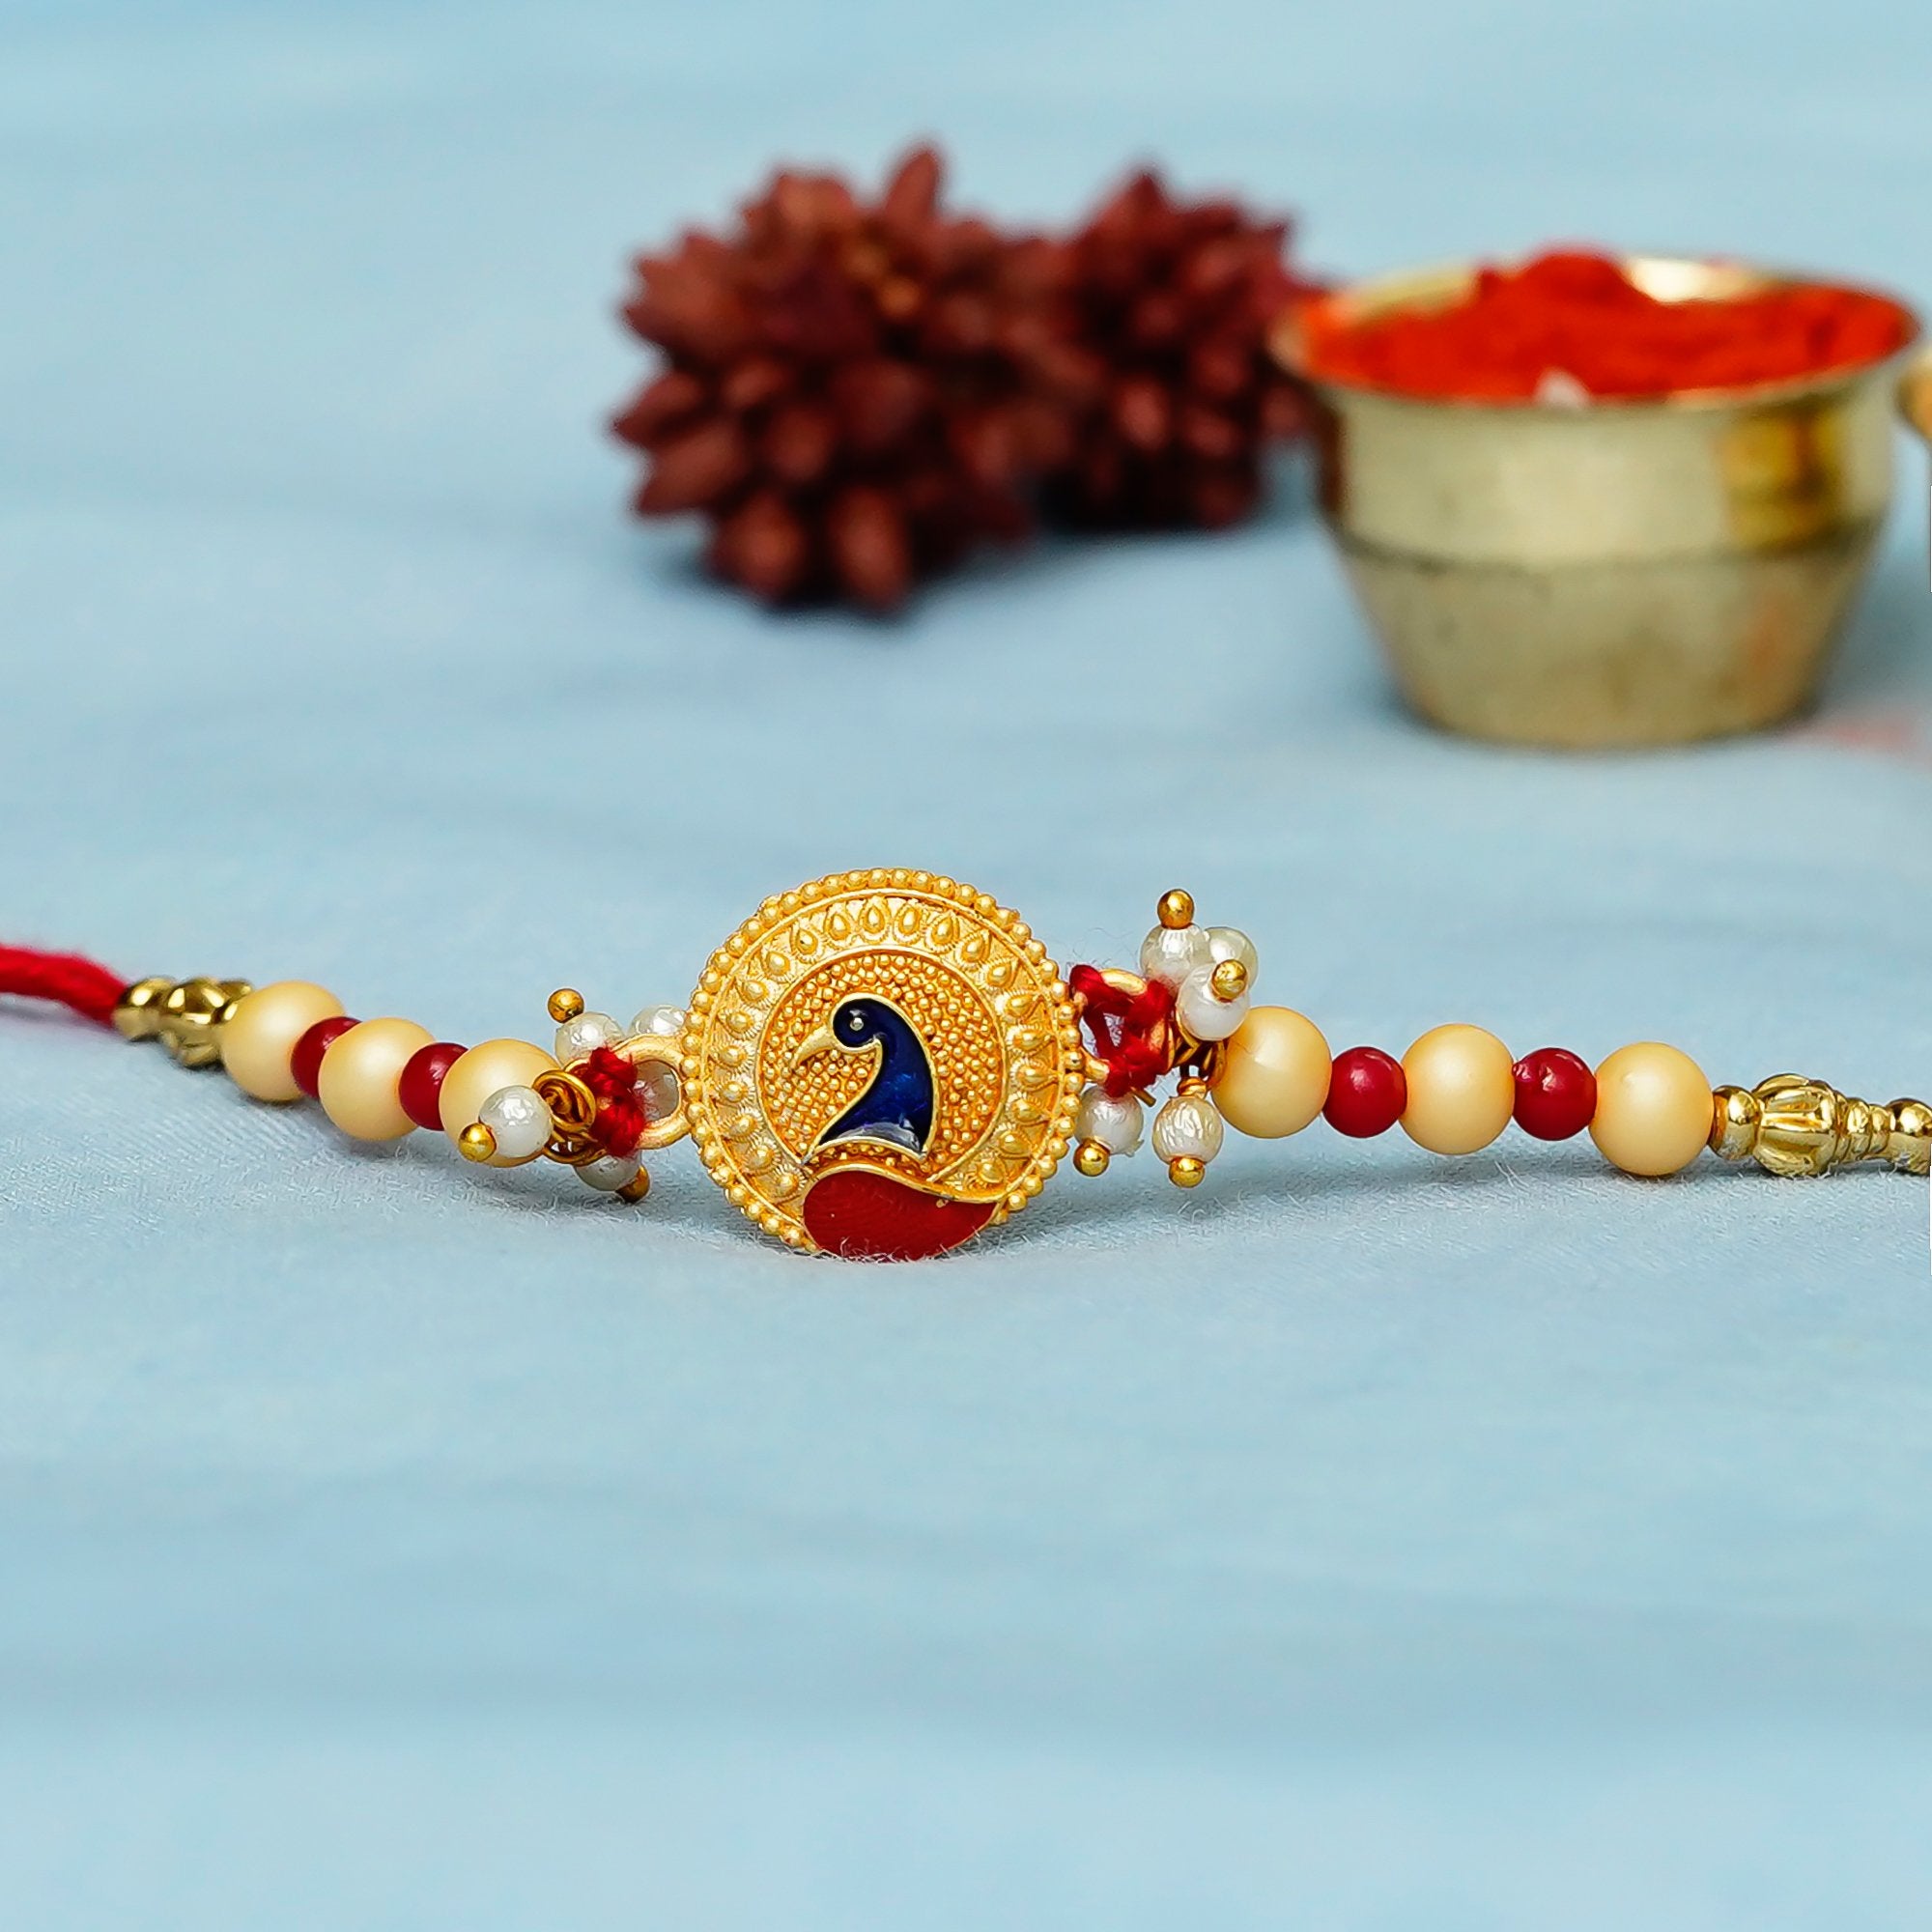 Designer Peacock Rakhi with Best Brother Trophy and Roli Chawal Pack 1